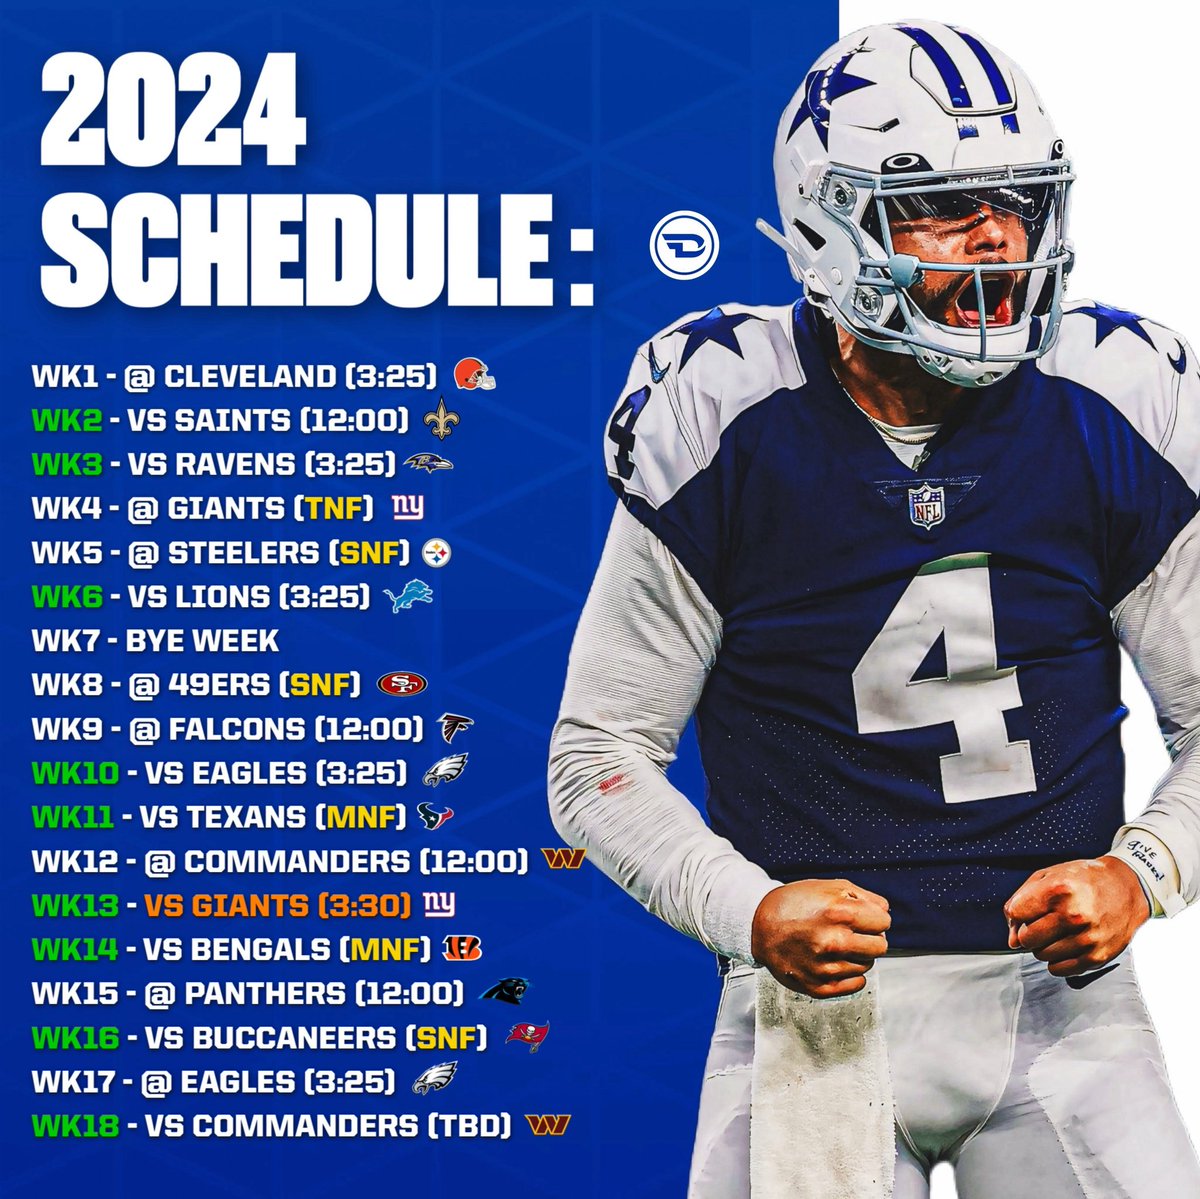 The Cowboys 2024 Schedule is here!